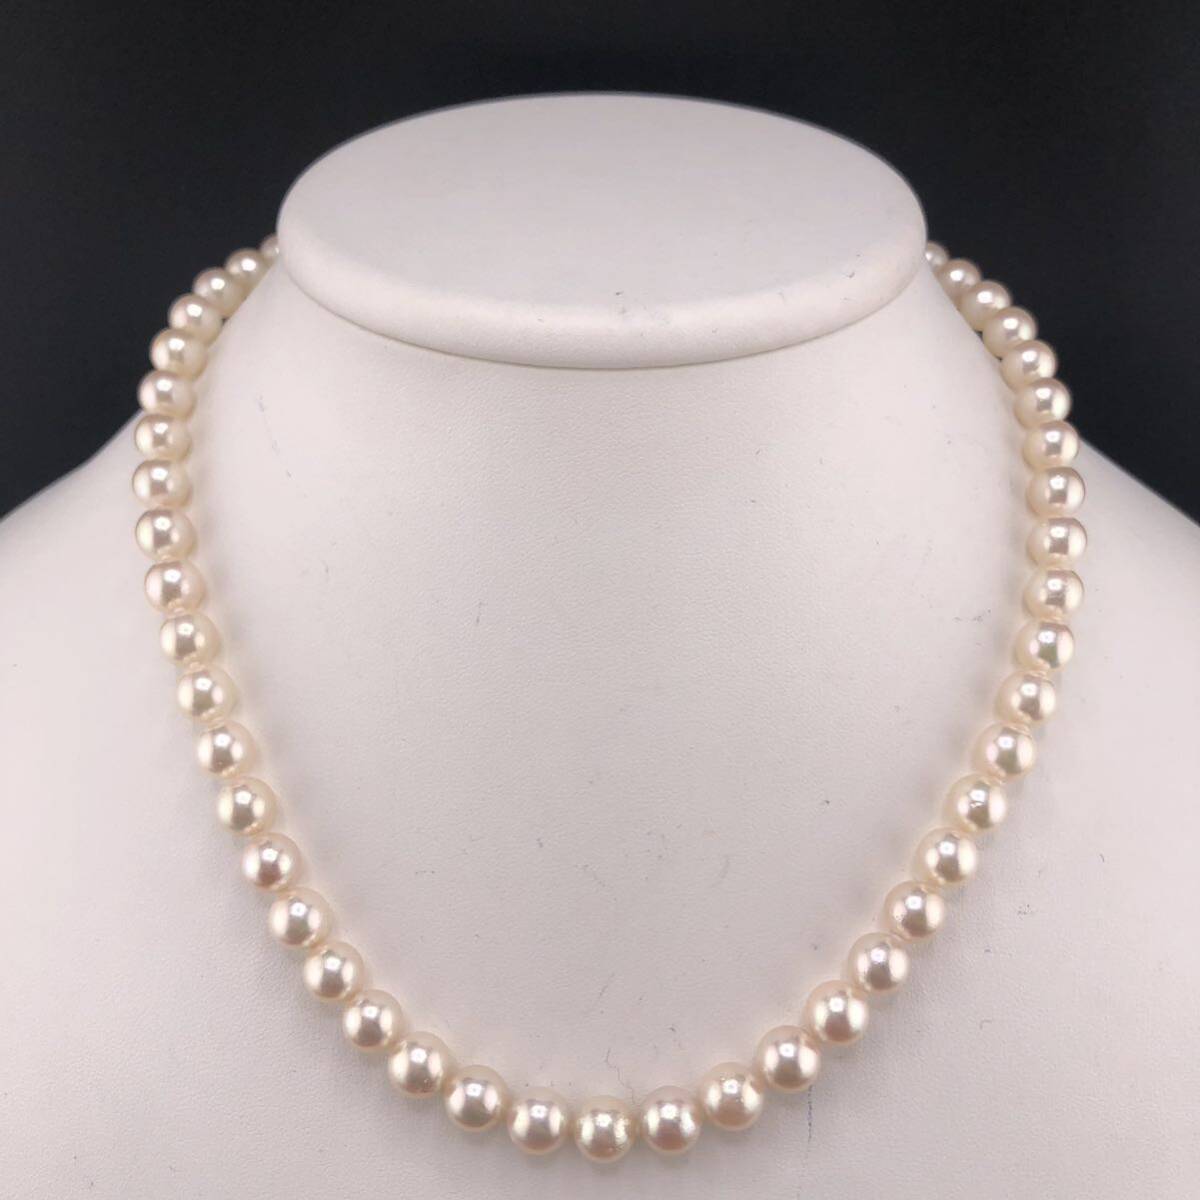 P05-0039 アコヤパールネックレス 7.5mm~8.0mm 42cm 31.8g ( アコヤ真珠 Pearl necklace SILVER )_画像1